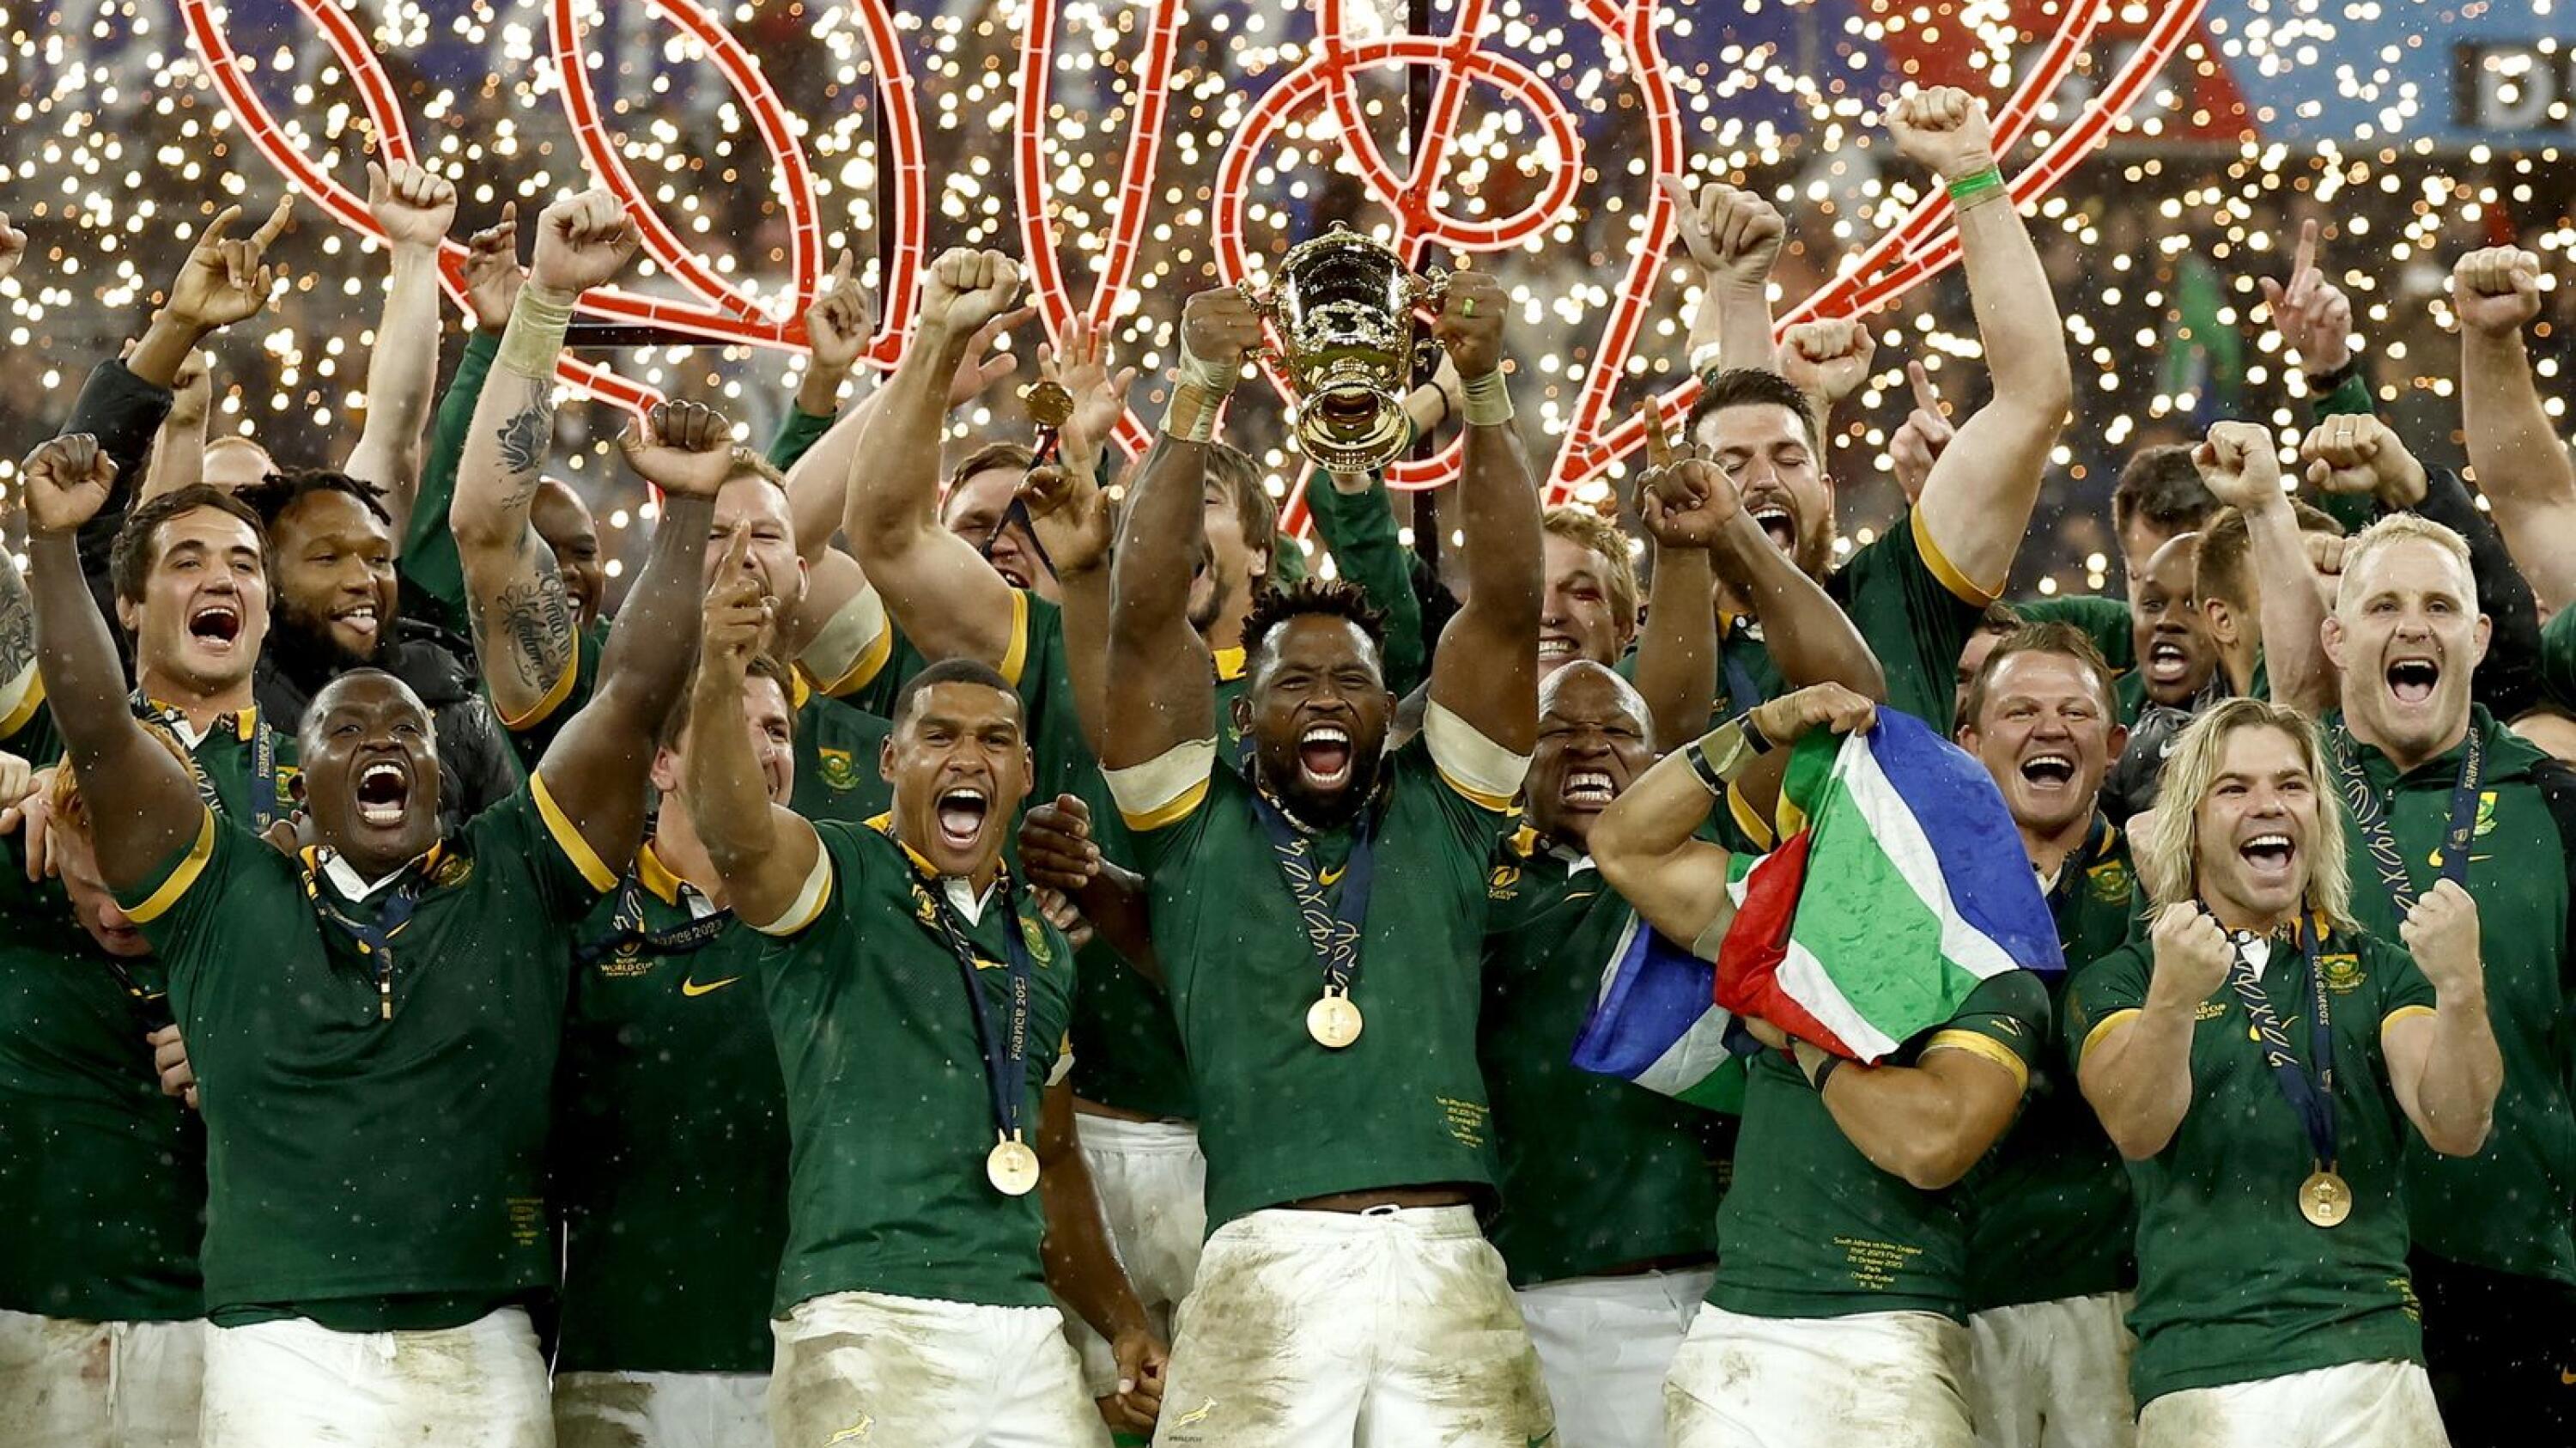 Springbok captain Siya Kolisi lifts the Webb Ellis trophy after the team won the Rugby World Cup final against New Zealand in Paris